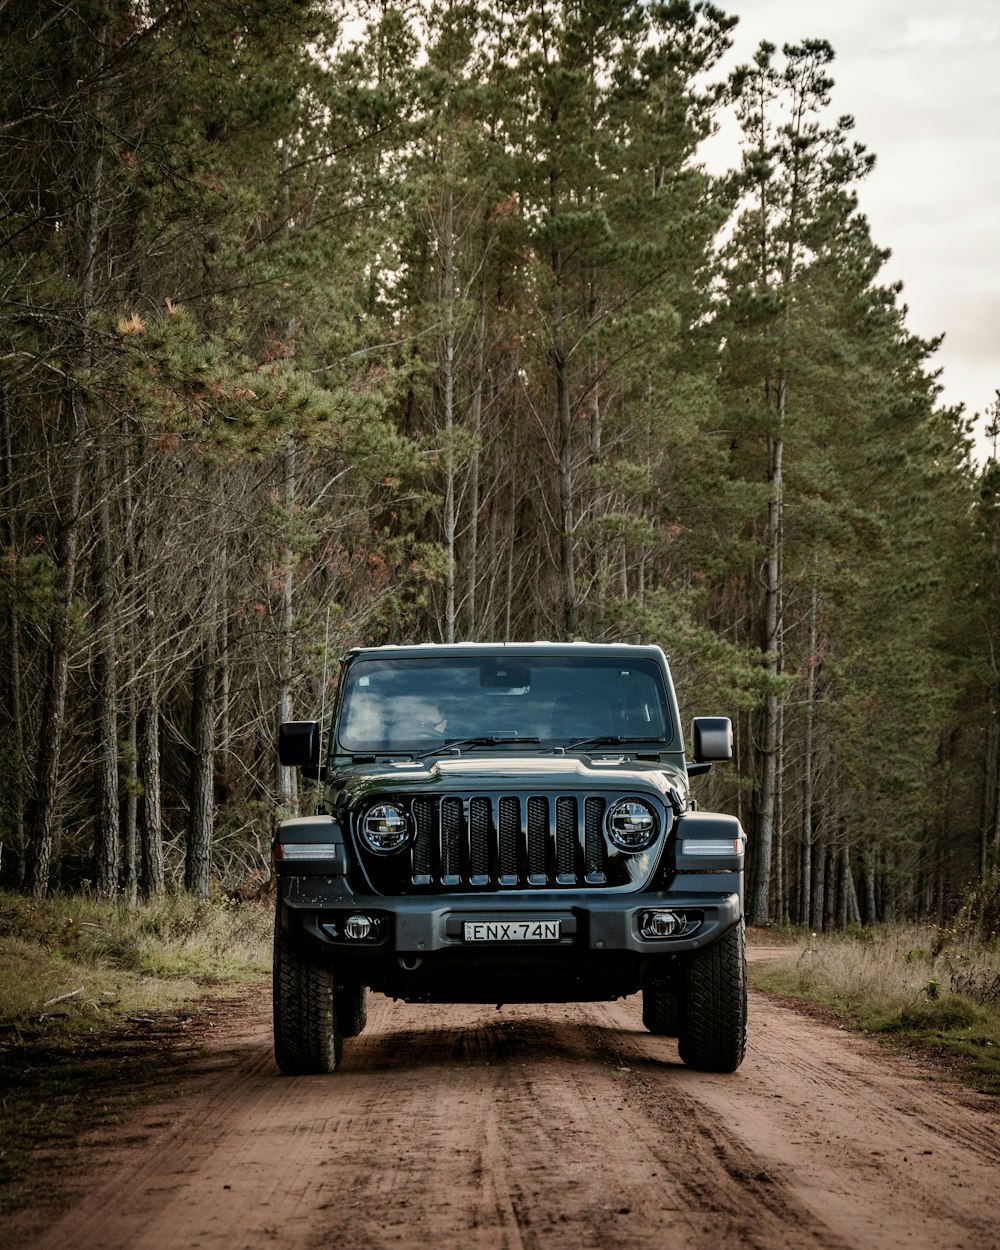 350+ Jeep Pictures [HD] | Download Free Images & Stock Photos on Unsplash